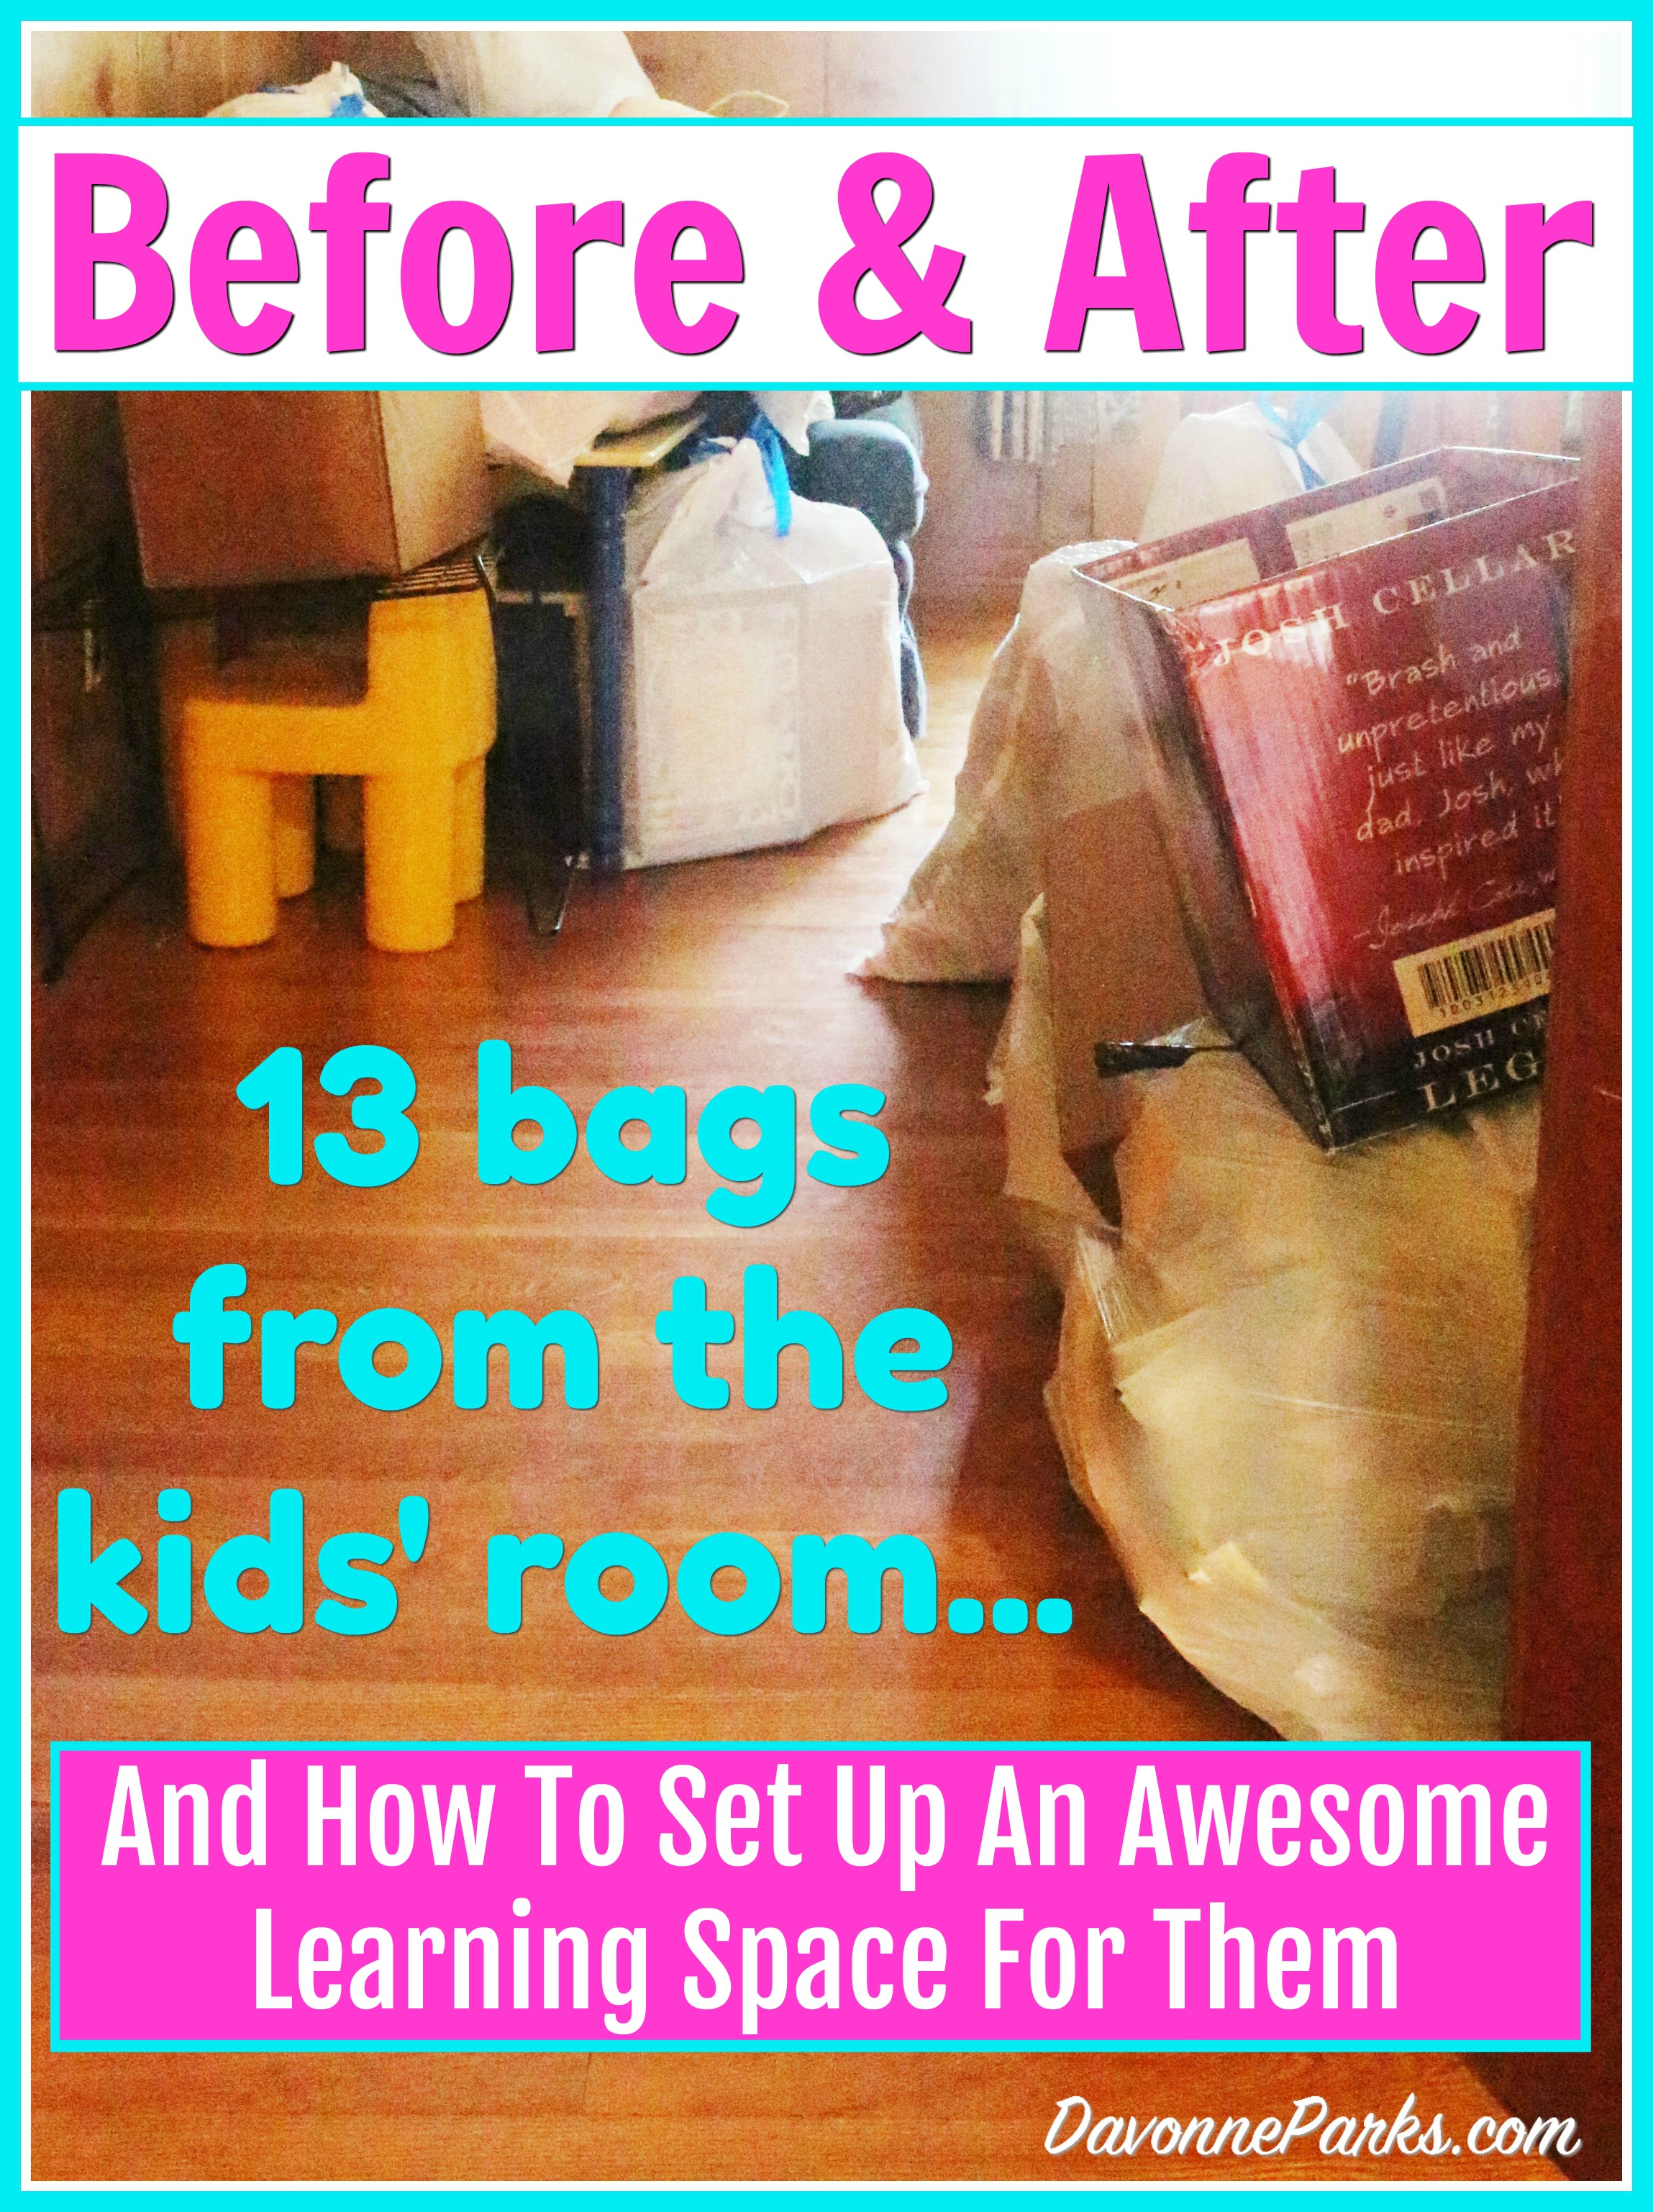 Schoolroom Before & After {Plus How You Can Set Up An Awesome Learning Space For Your Kids}